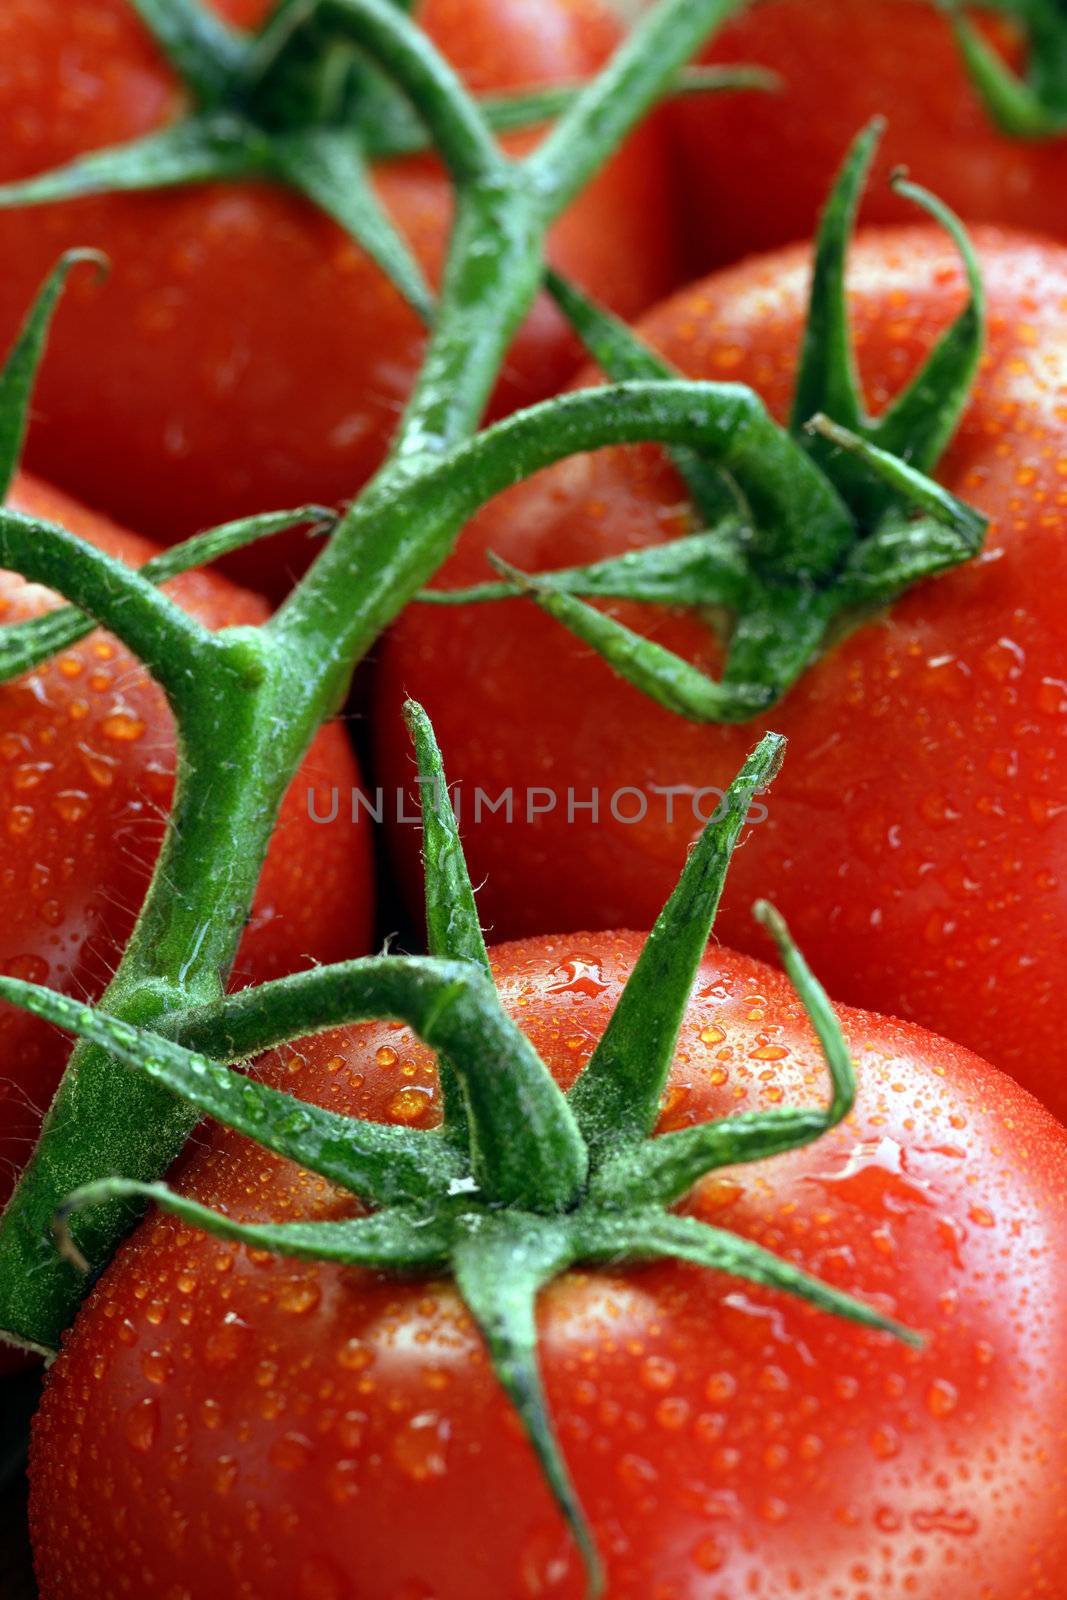 Tomatoes by sumners